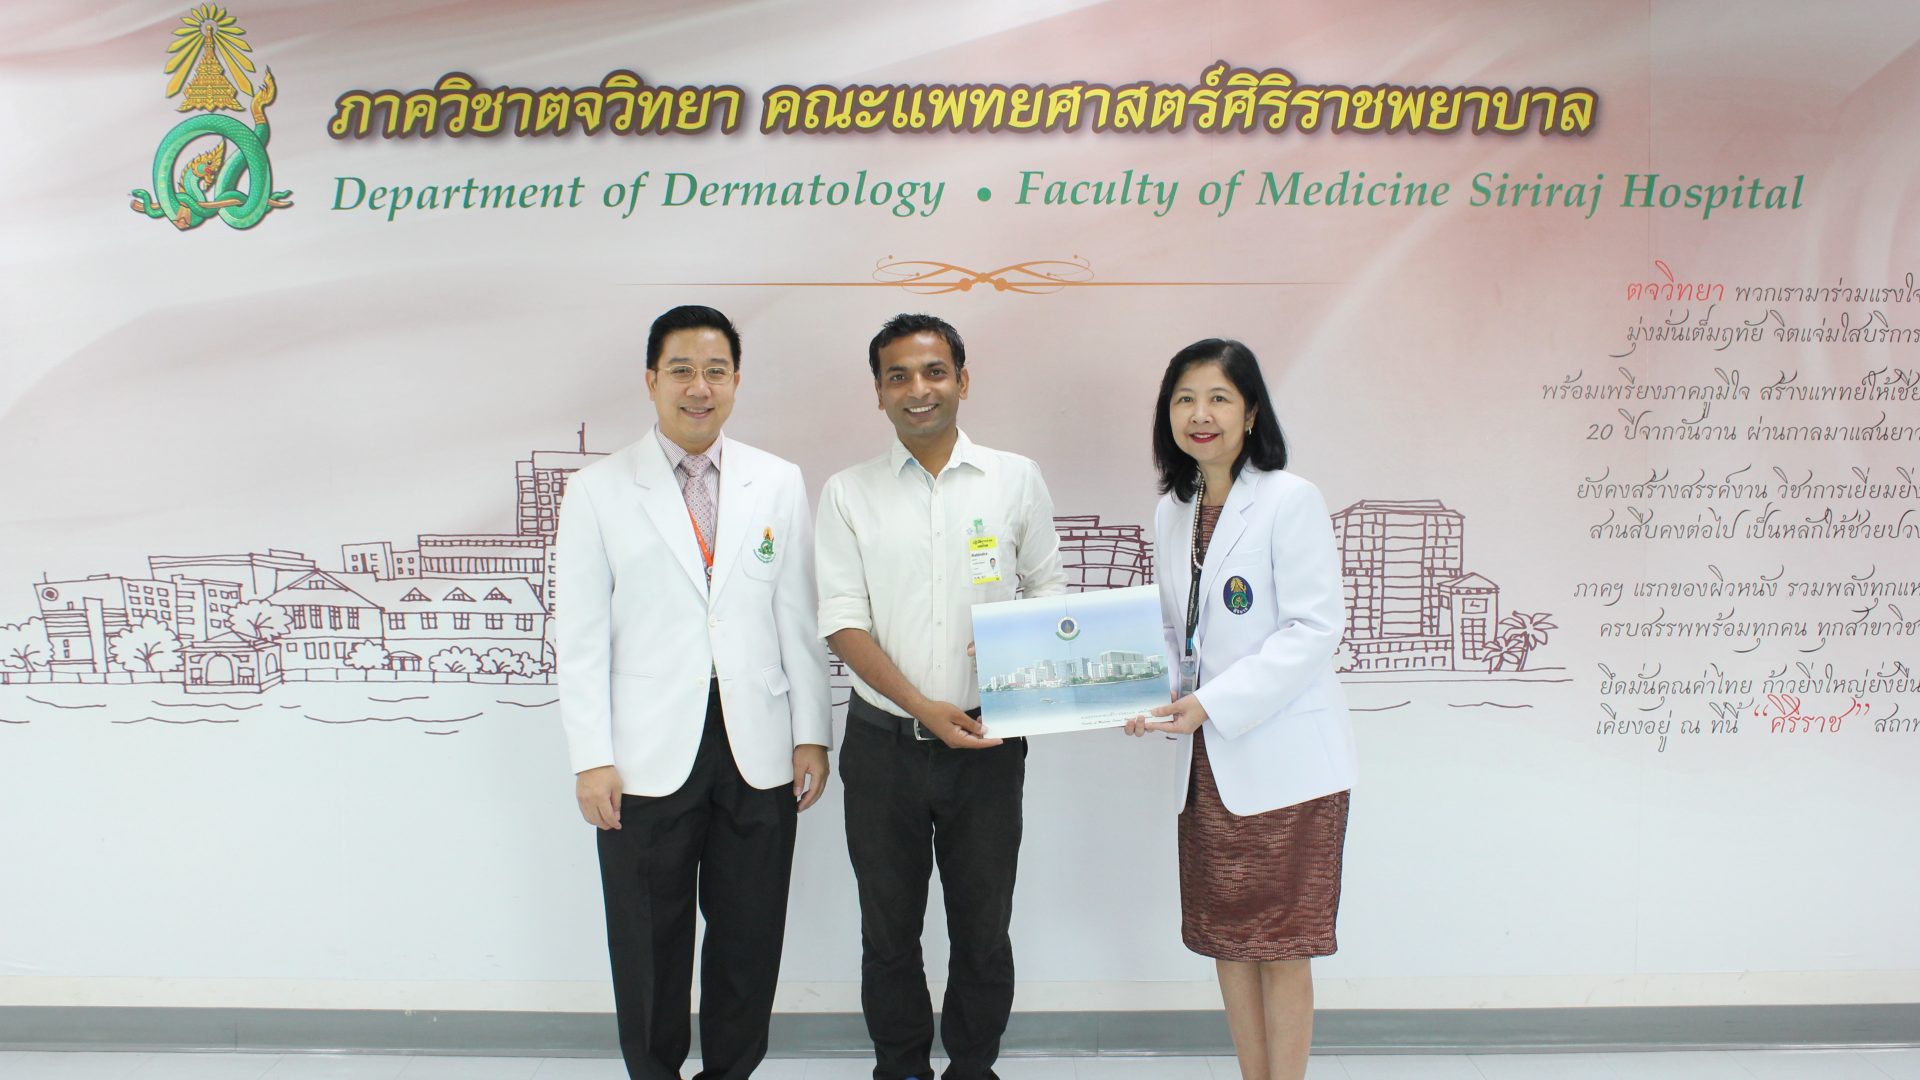 Certification Ceremony of Siriraj Scholarship for Doctors from ASEAN and Developing Countries